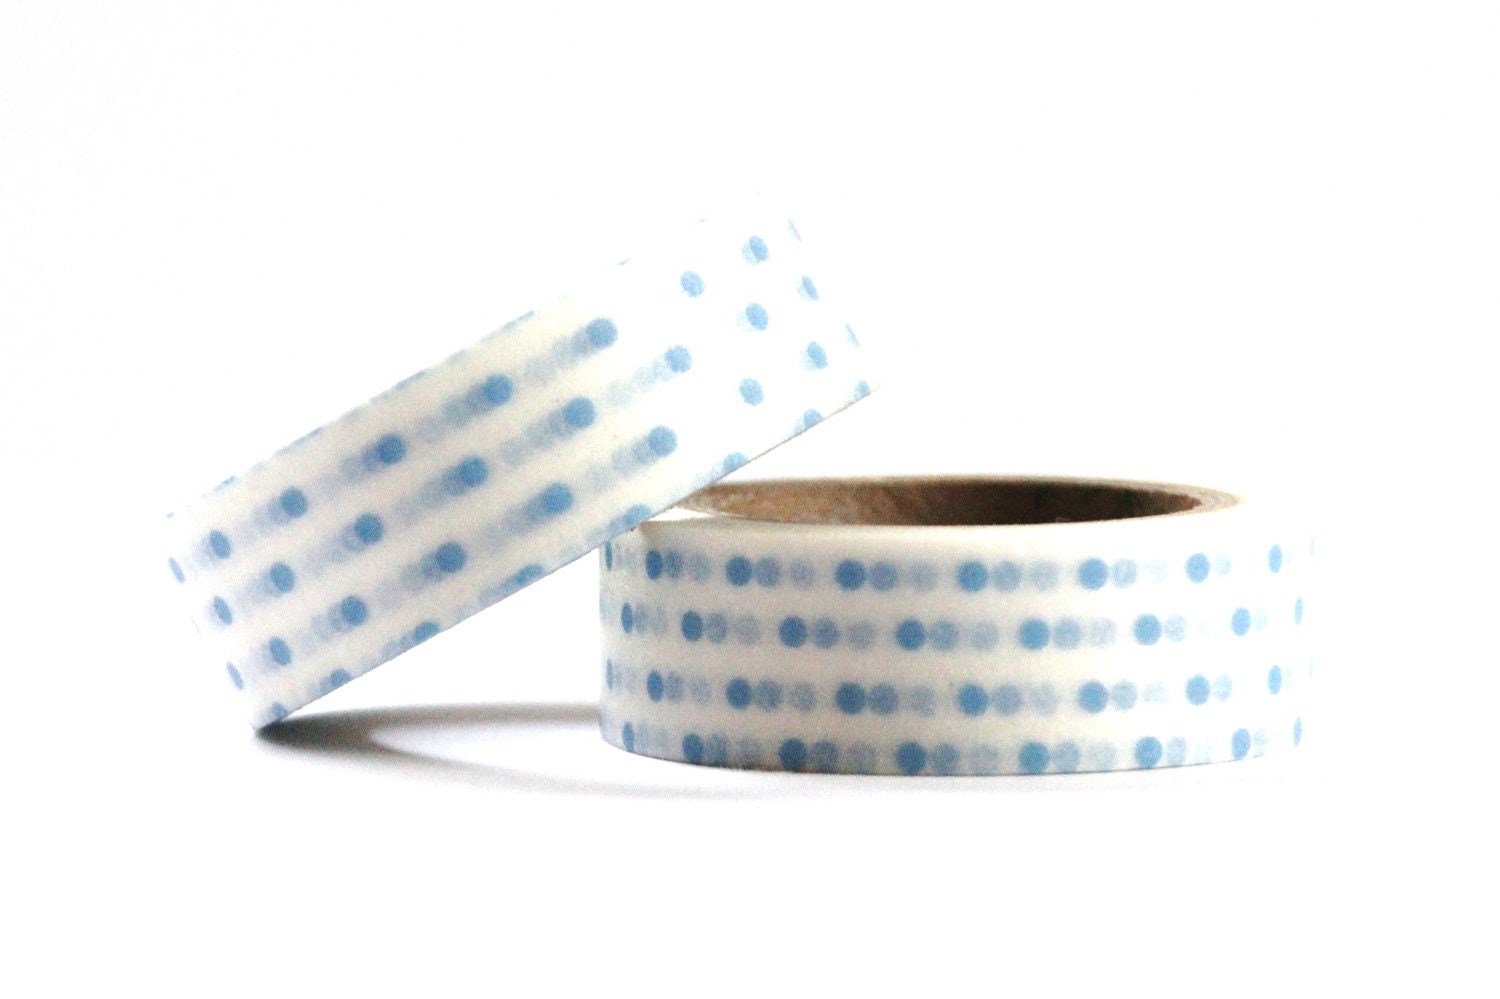 1 Roll of Sky Blue and White Polka Dots on White Masking Tape / Japanese Washi Tape (.60 inches x 33 feet) - BahanaSplitsBoutique